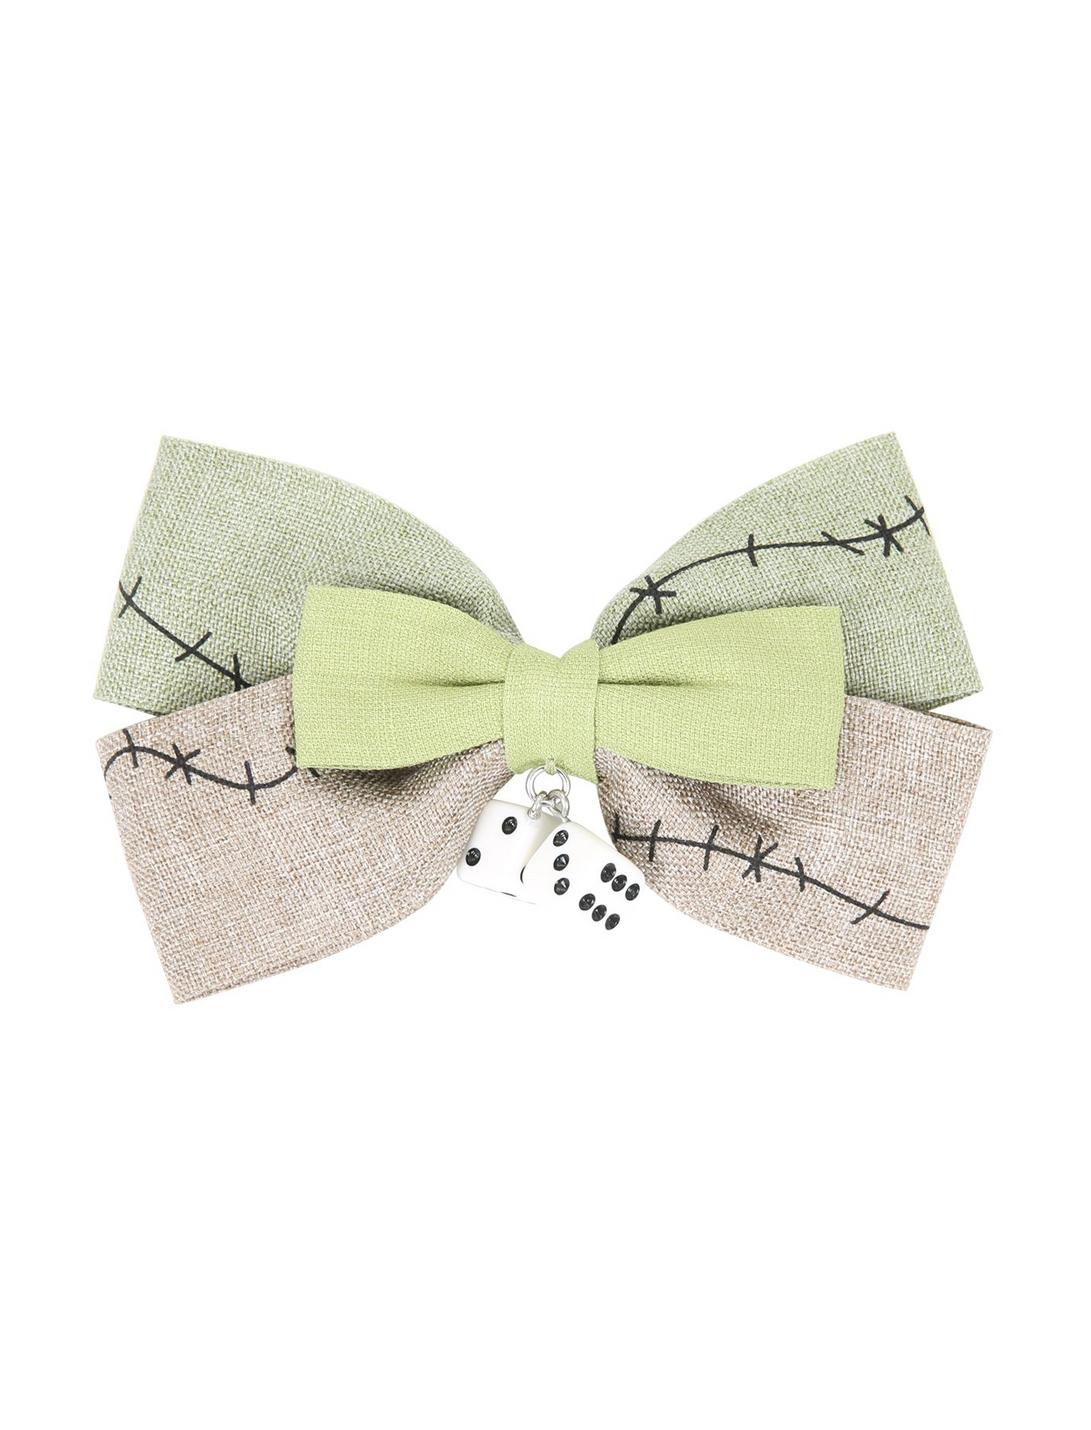 The Nightmare Before Christmas Oogie Boogie Cosplay Hair Bow, , hi-res